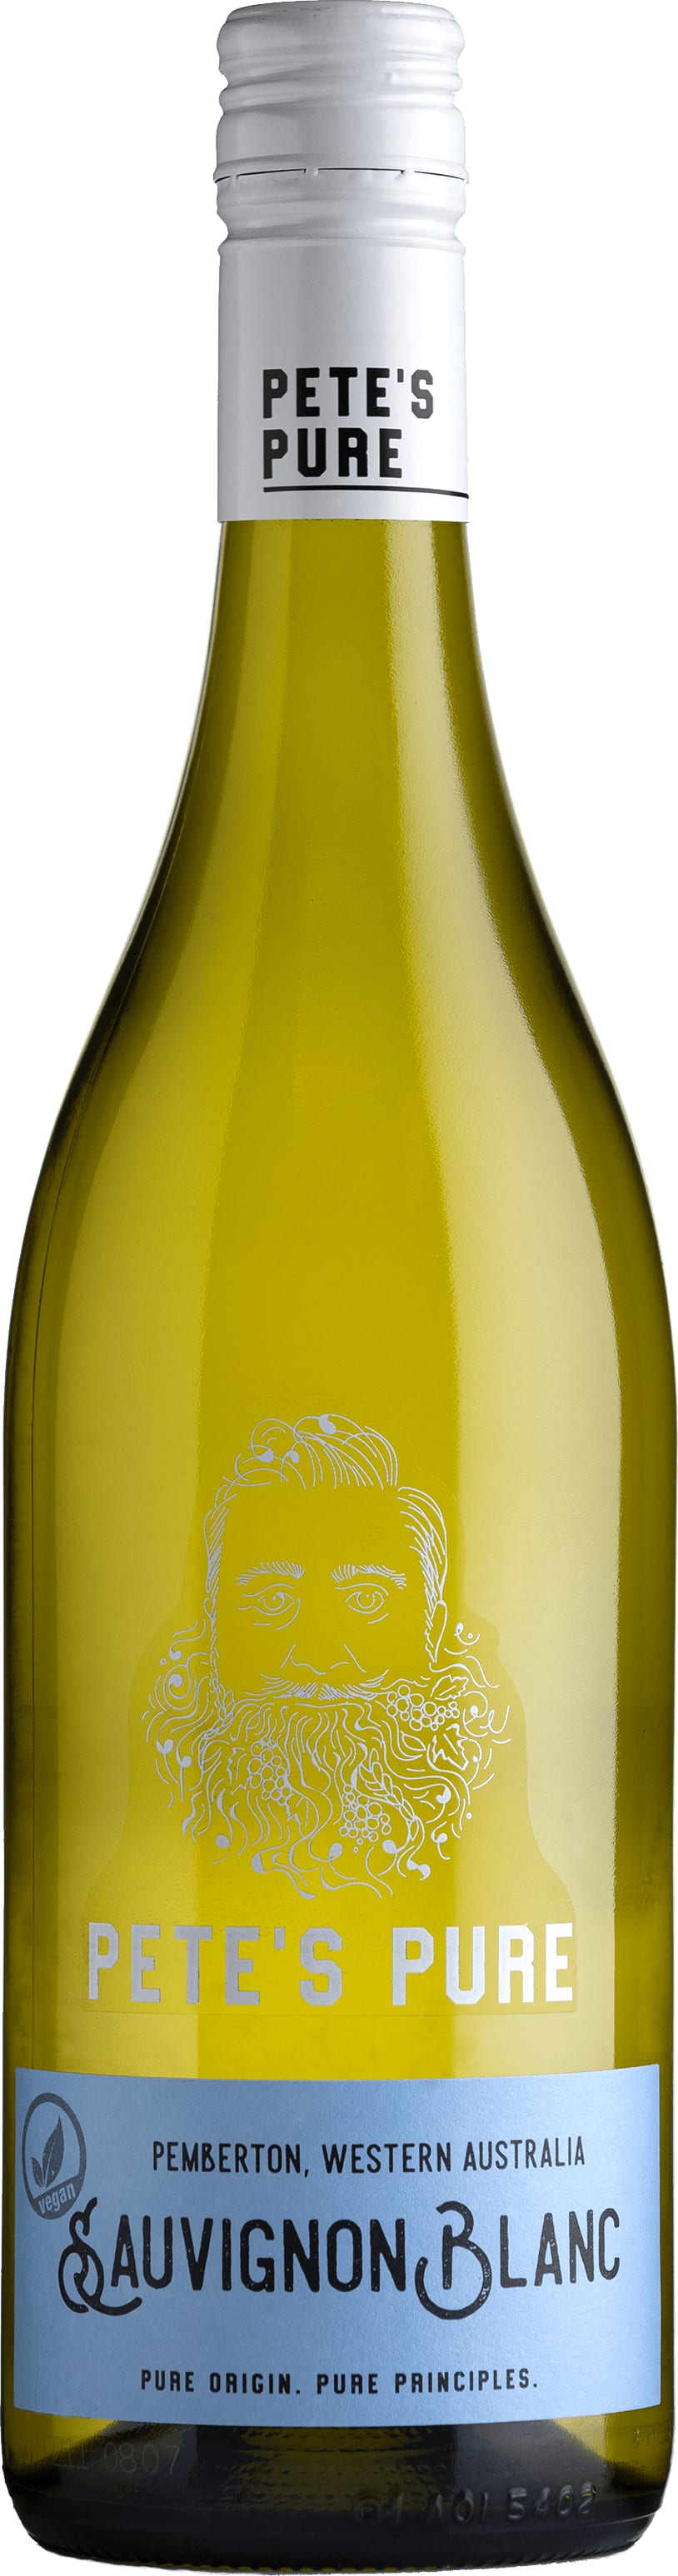 Sauvignon Blanc 22 Pete's Pure 75cl - Buy Pete's Pure Wine Wines from GREAT WINES DIRECT wine shop